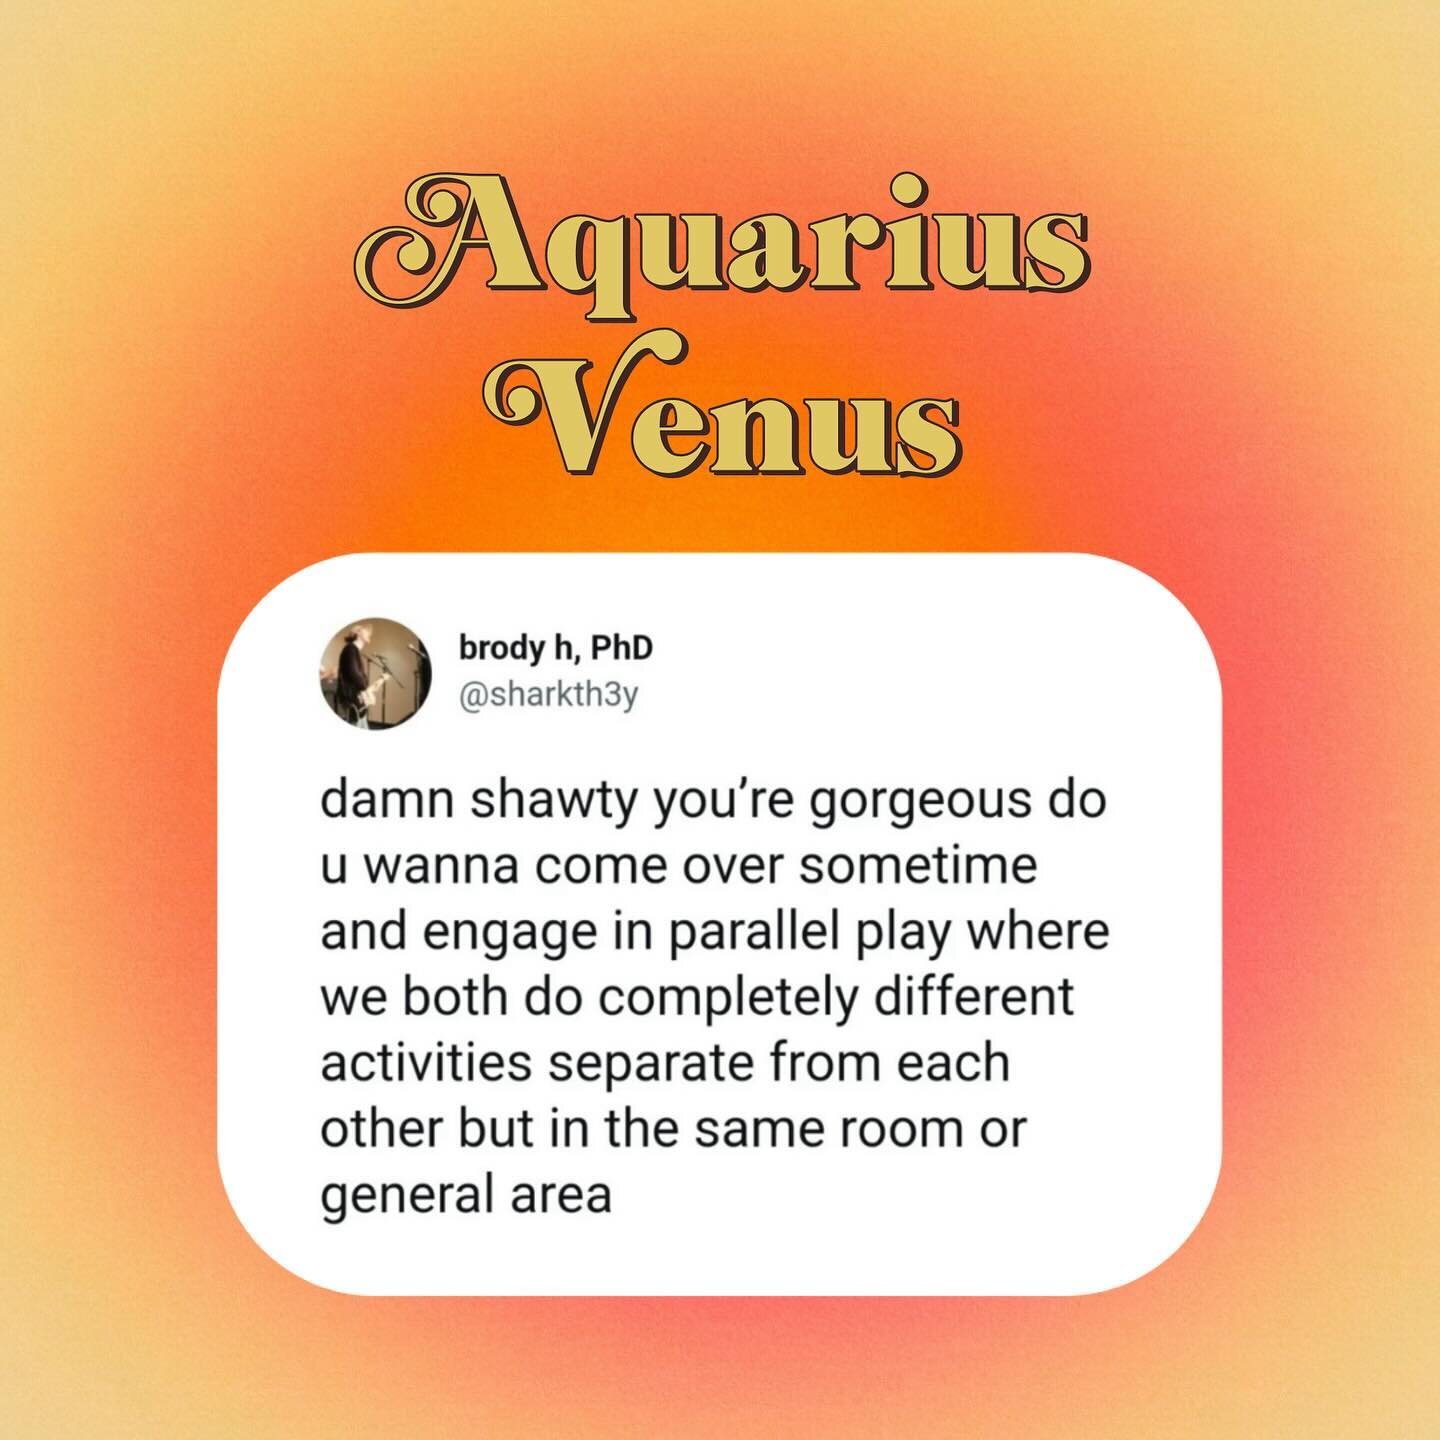 Venus has entered the sign of Aquarius! In astrology, Venus is the planet that represents how you express yourself romantically, what you need in relationships, how you flirt, what you value, how you spend your money and what you appreciate when it c